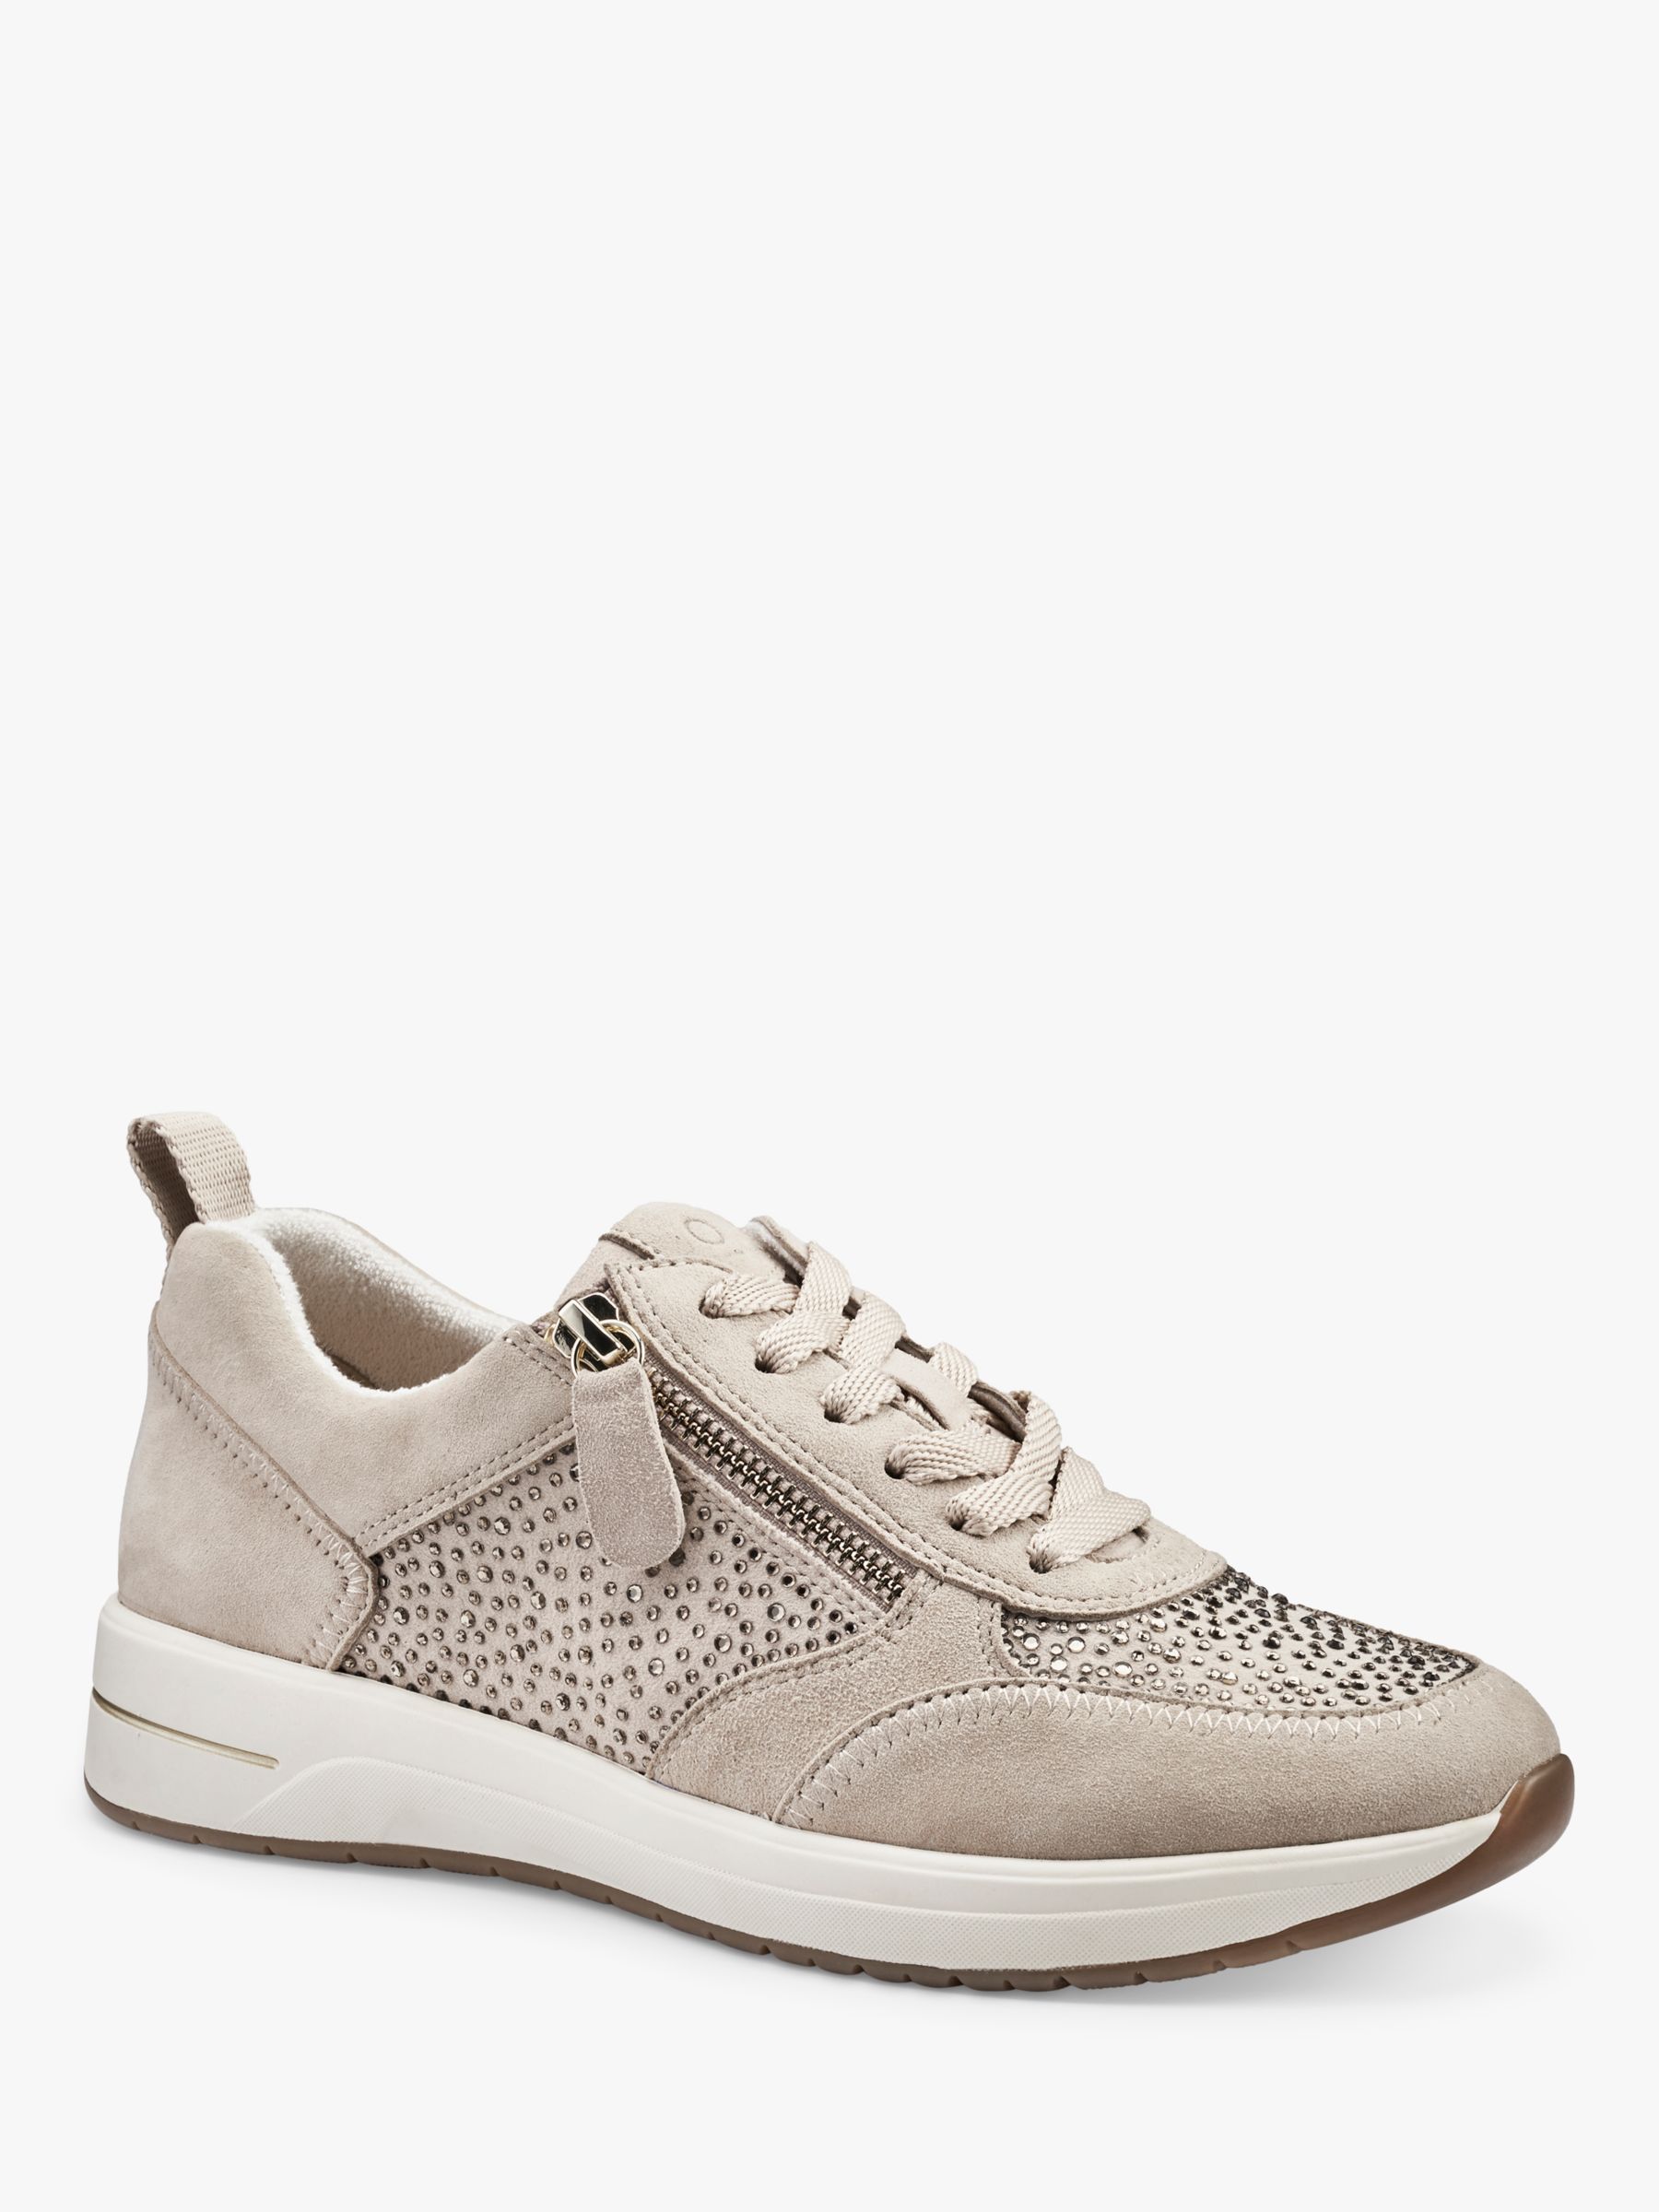 Buy Hotter Zodiac Embellished Zip and Go Trainers Online at johnlewis.com